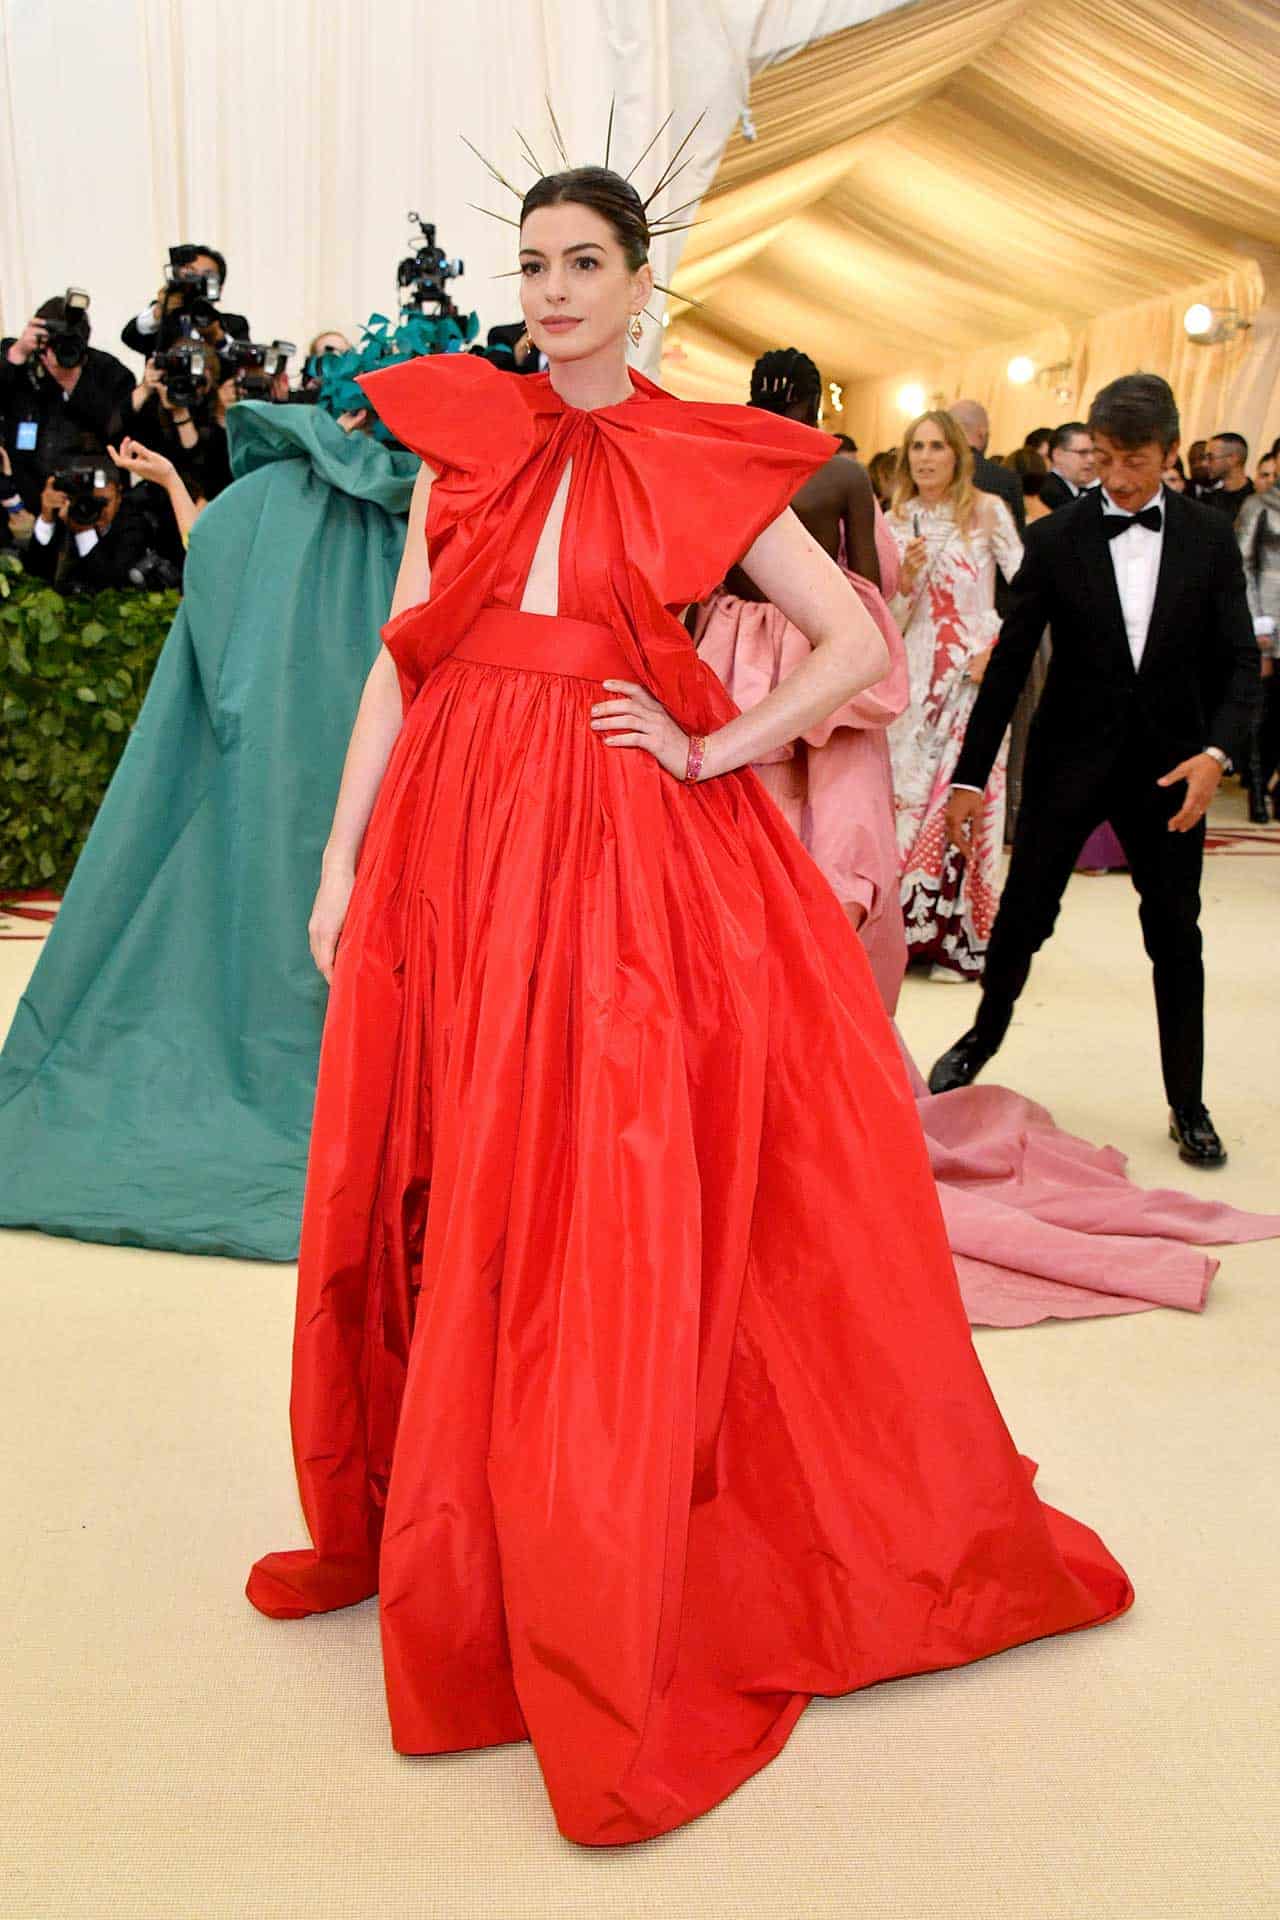 Anne Hathaway at the 2018 MET Gala wearing Valentino